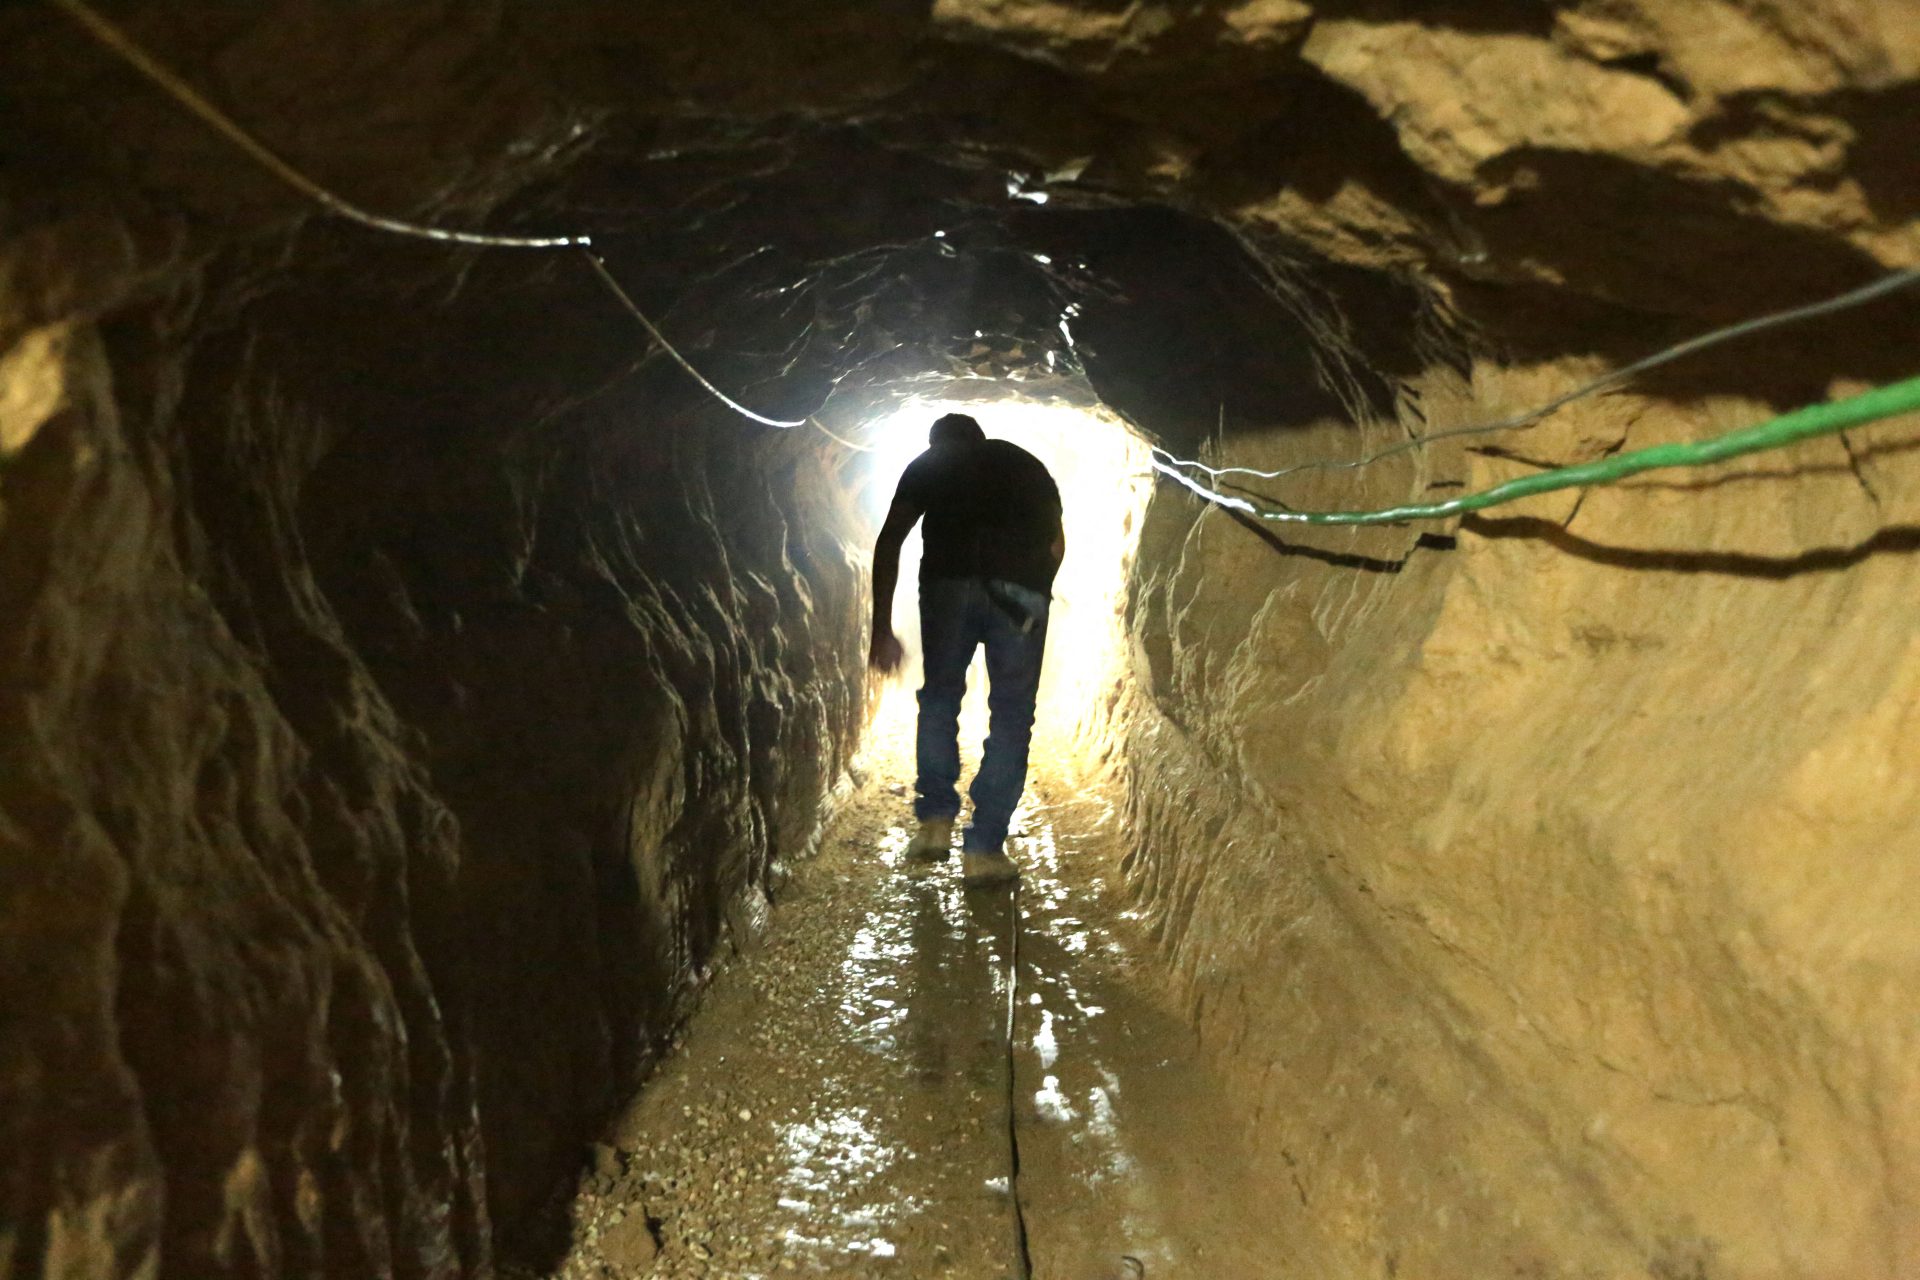 Egypt tried to put an end to the tunnels at their border